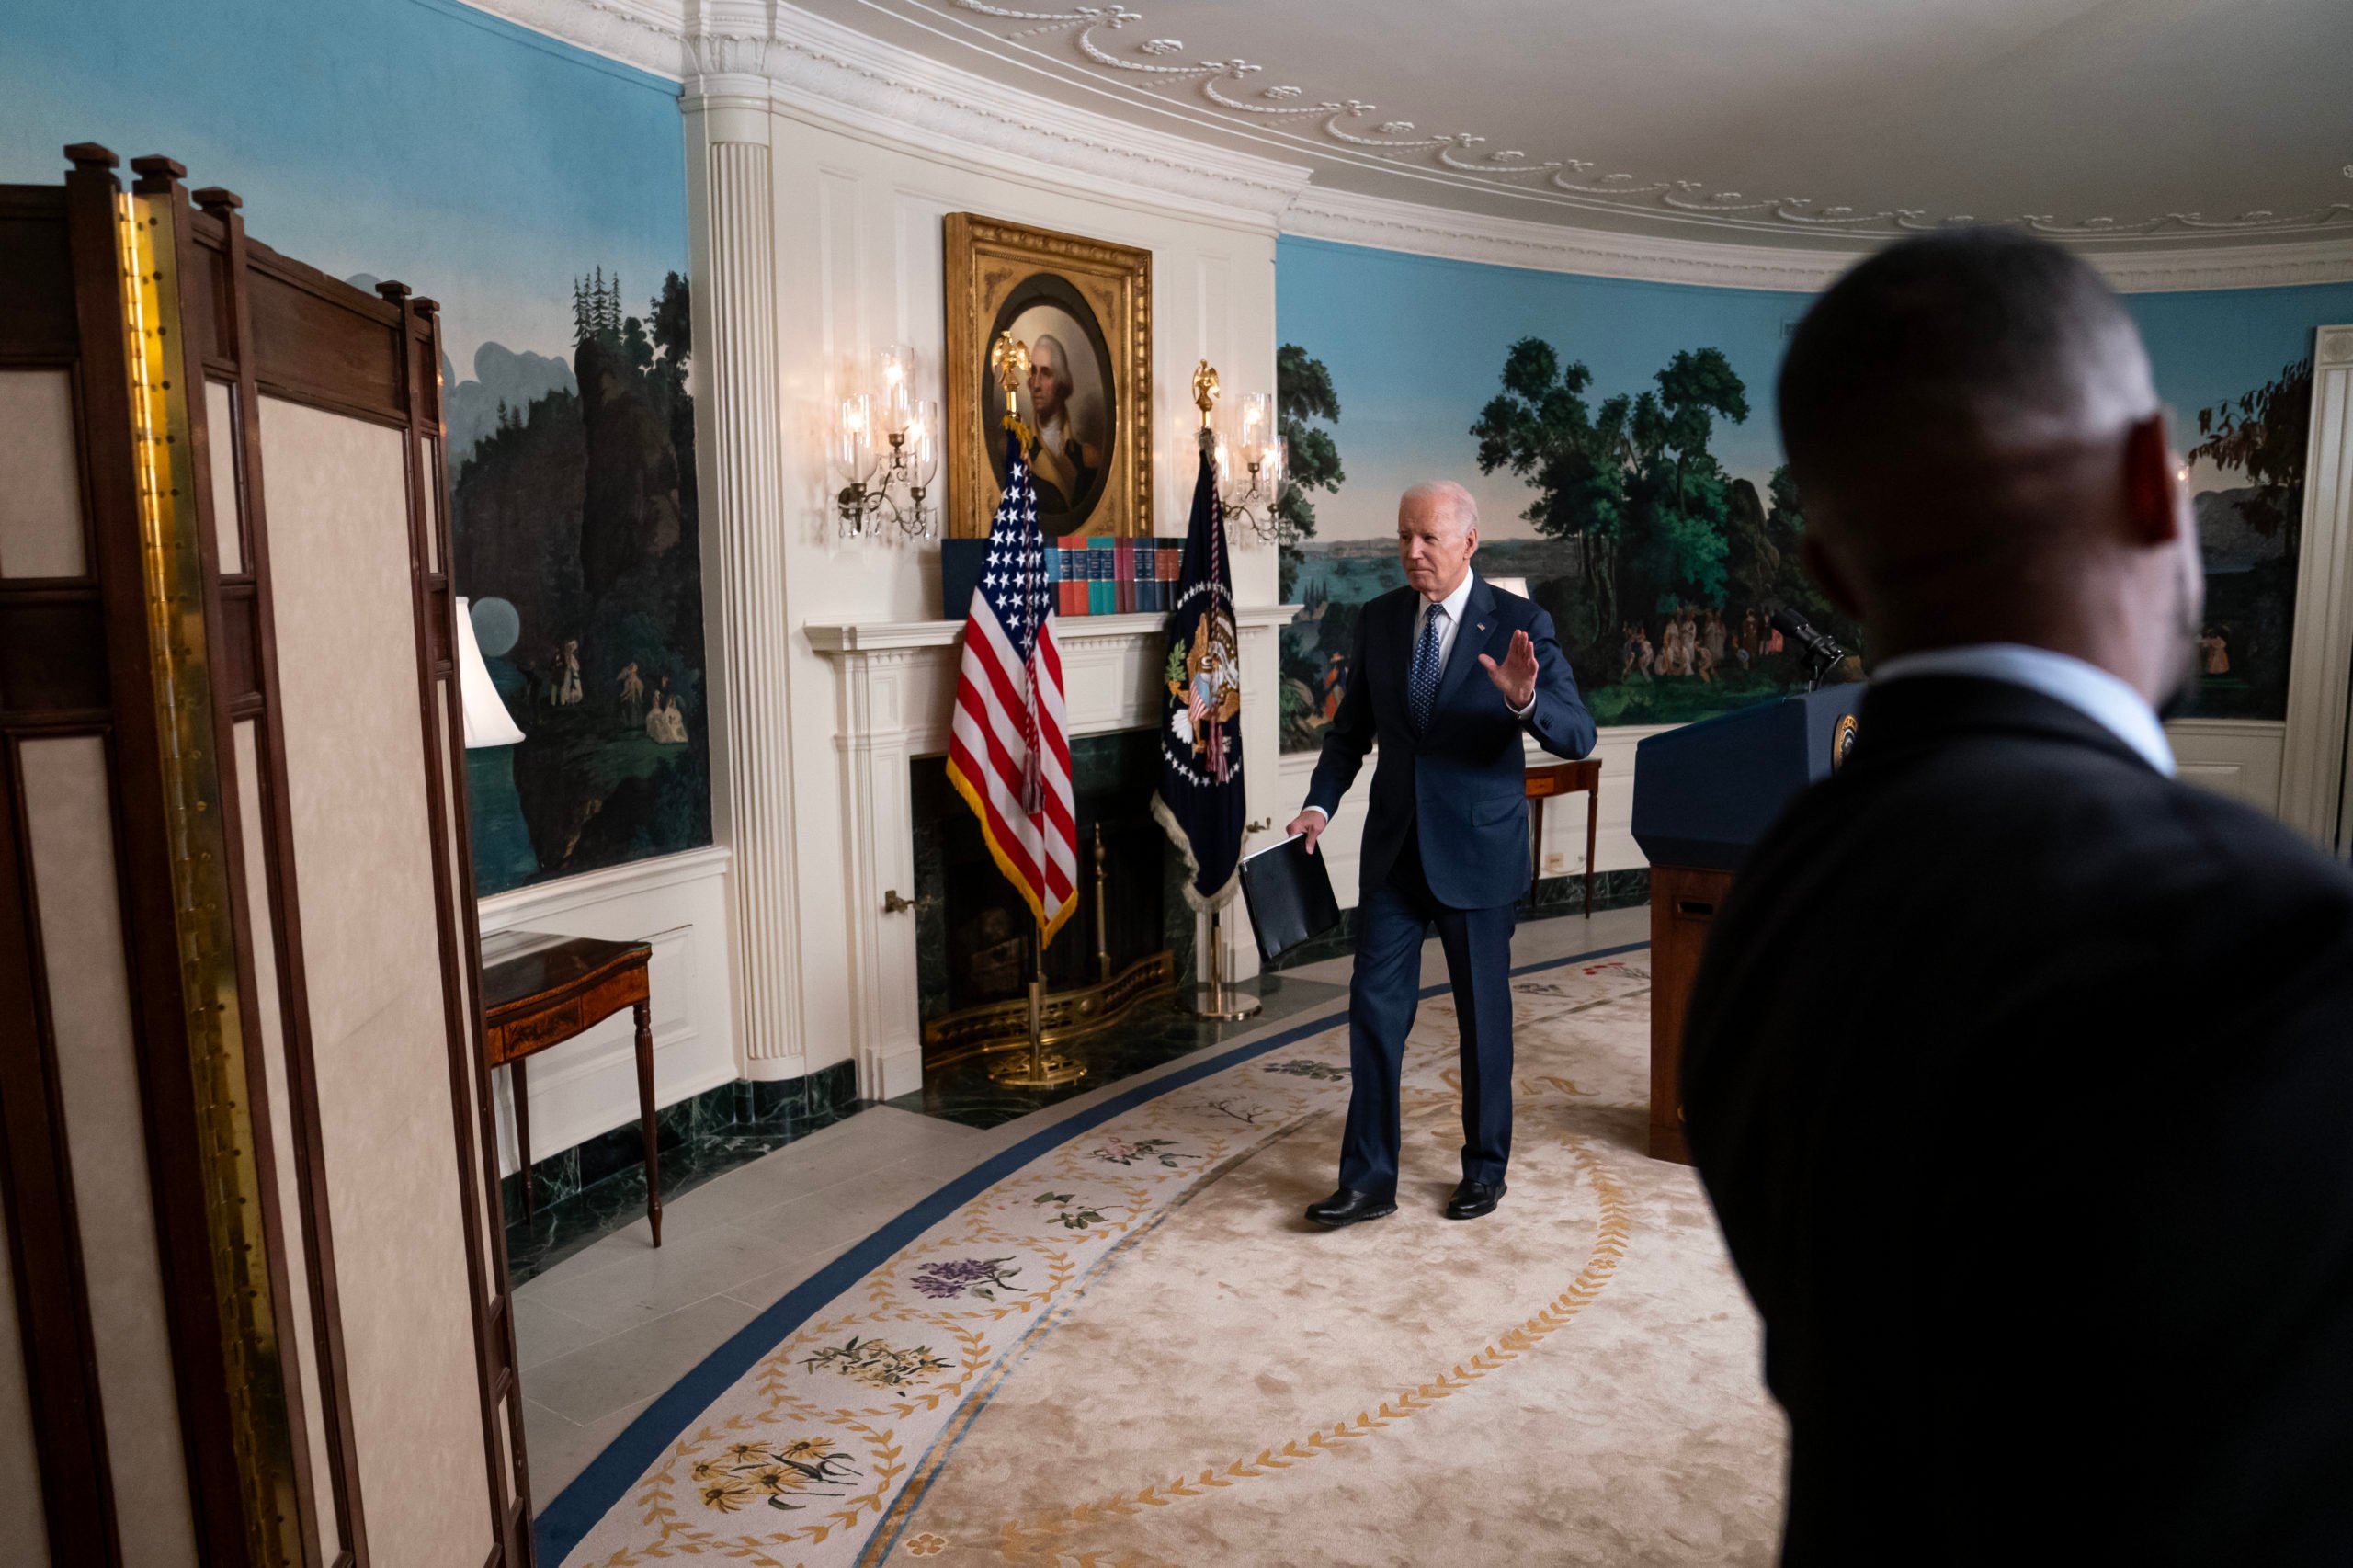  U.S. President Joe Biden departs after delivering remarks in the Diplomatic Reception Room of the White House on February 8, 2024 in Washington, DC. Biden addressed the Special Counsel's report on his handling of classified material, and the status of the war in Gaza. (Photo by Nathan Howard/Getty Images)